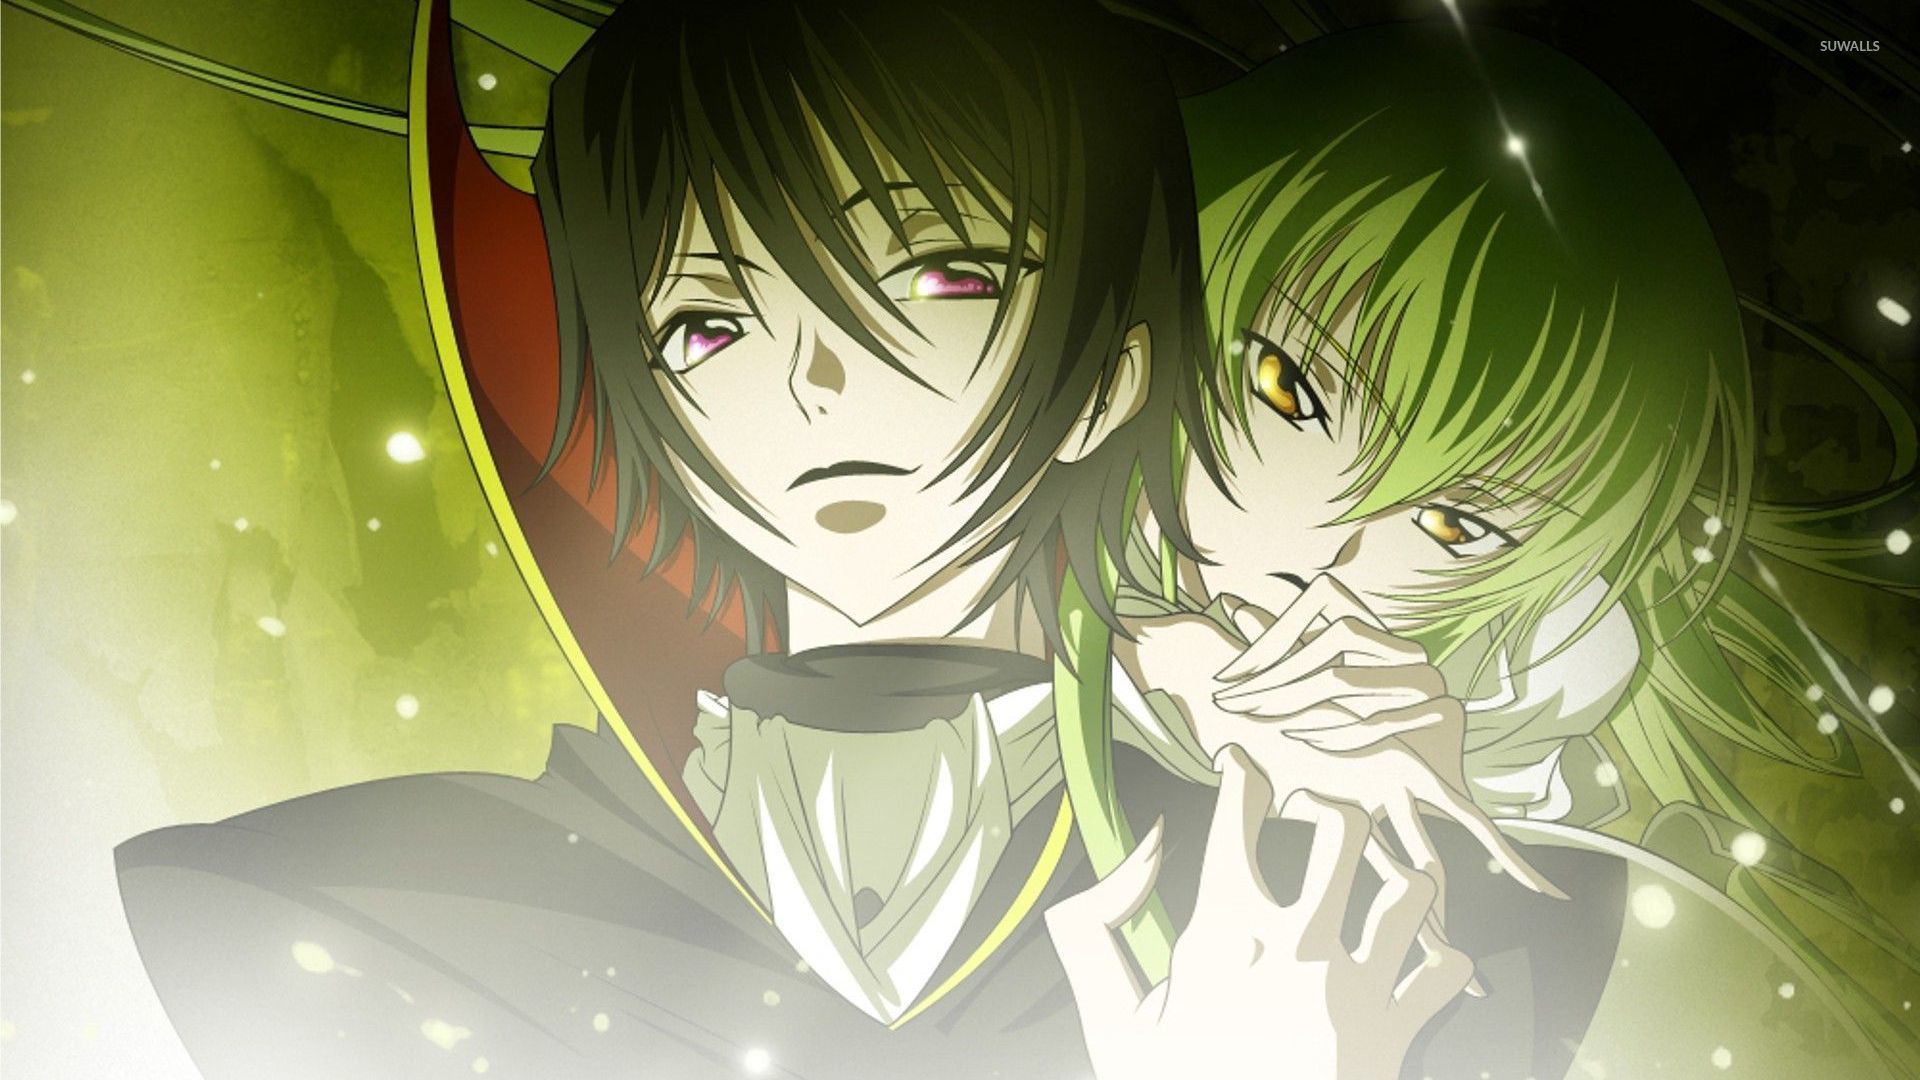 C And Lelouch Lamperouge Wallpaper Anime